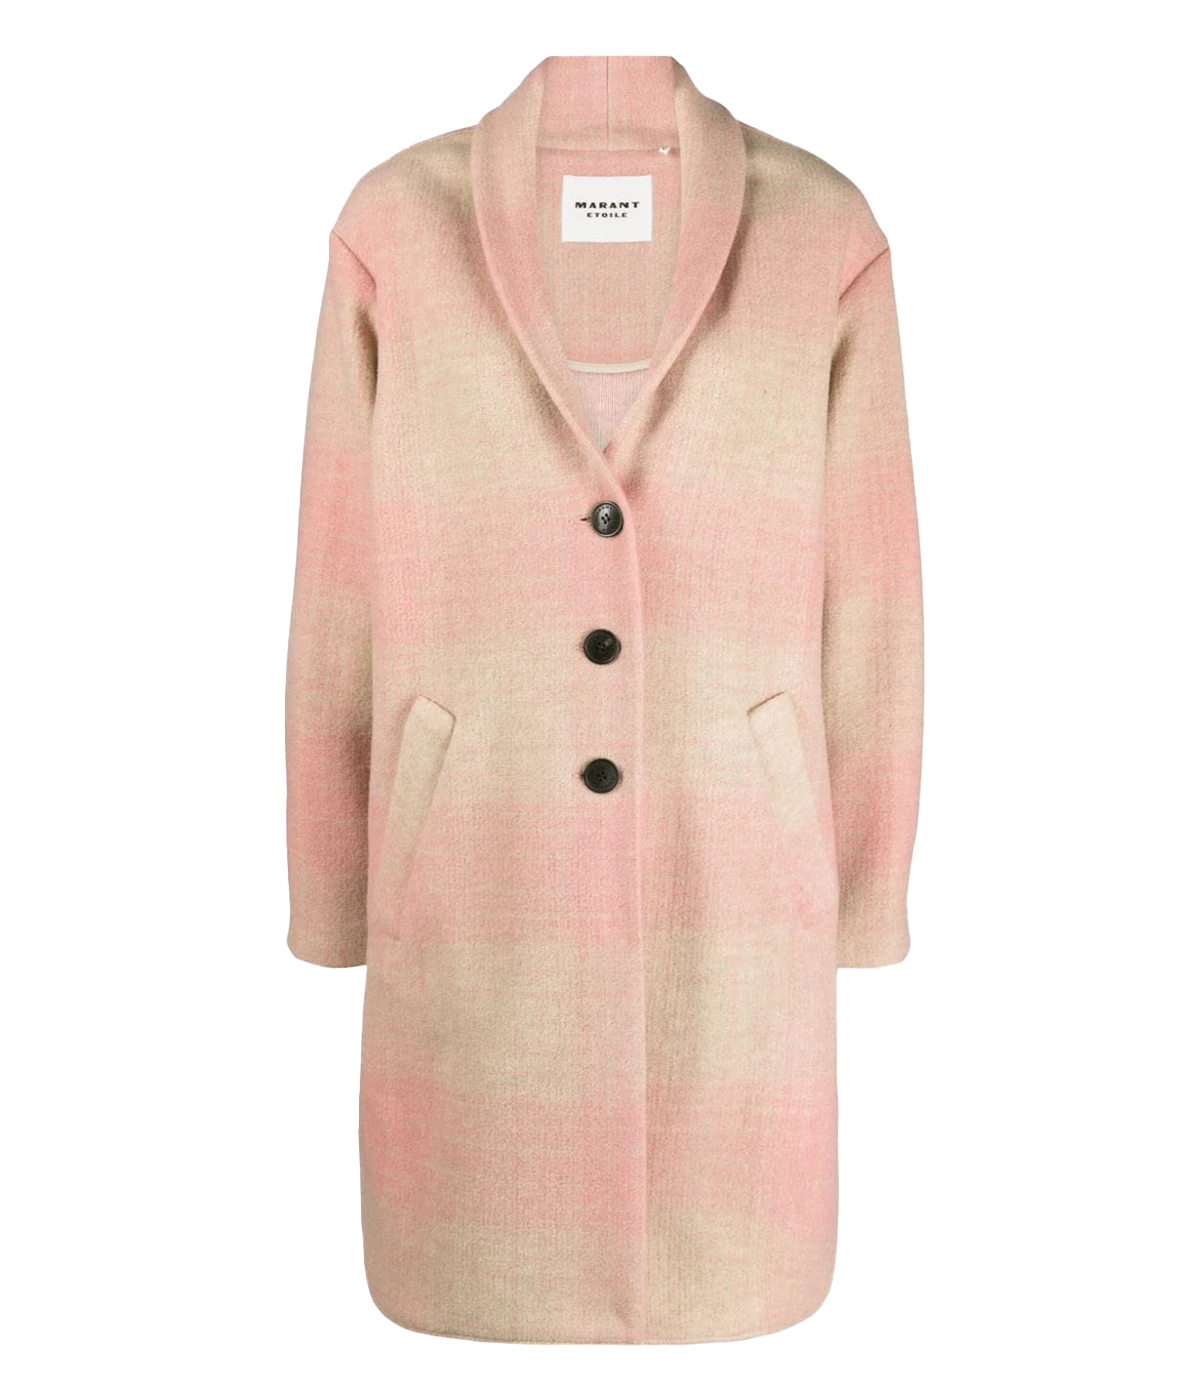 A mid-length straight hem pink and beige check wool coat by Isabel Marant.  Loose and unstructured, perfect for cooler days.